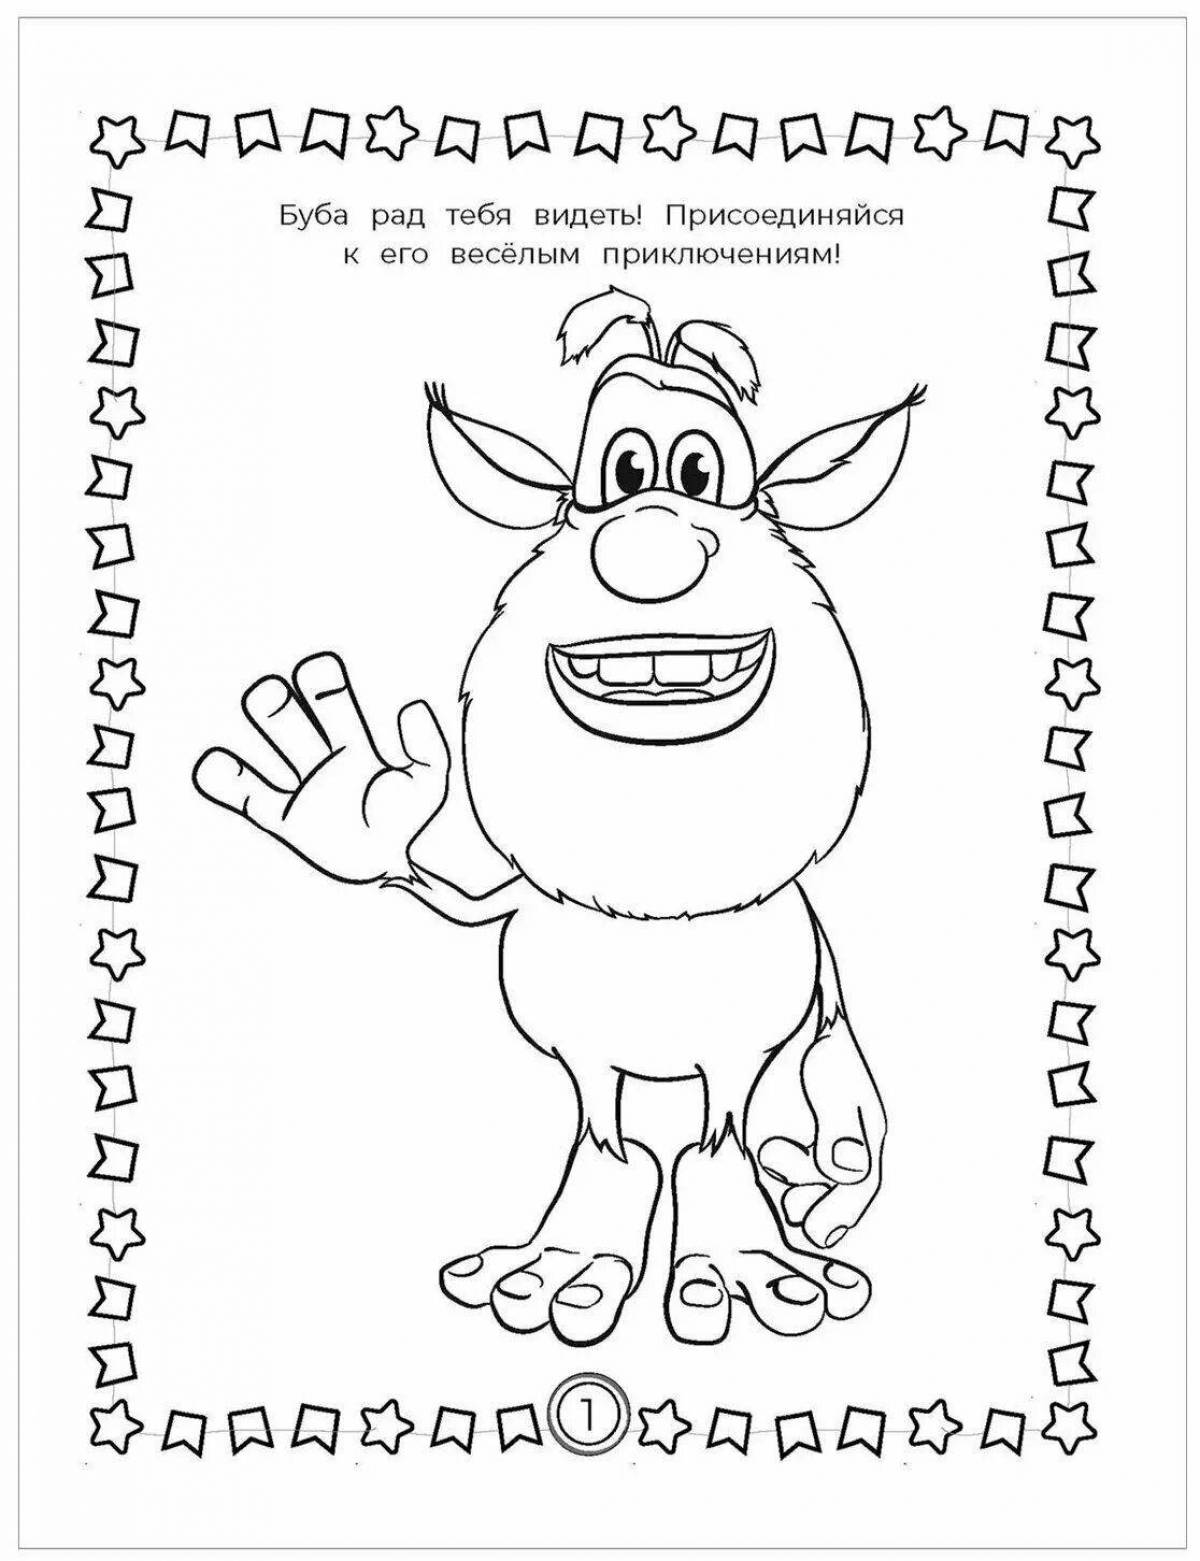 Booba colorful coloring game